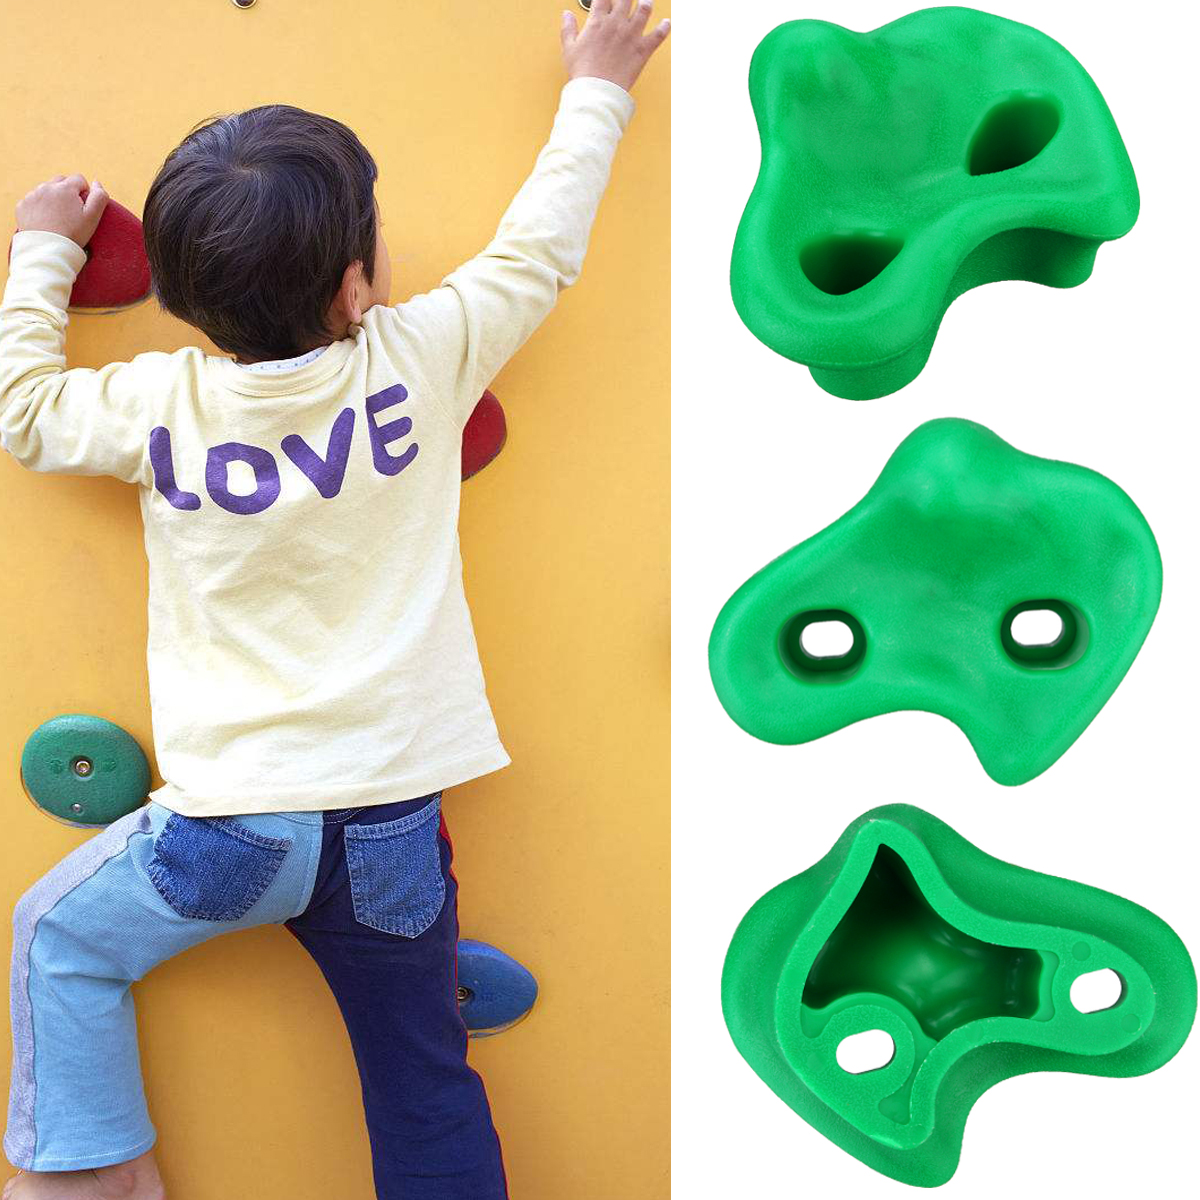 

Climbing Holds Rock Wall Stones Holds Grip Lot Textured For Kid Indoor Home Decorations